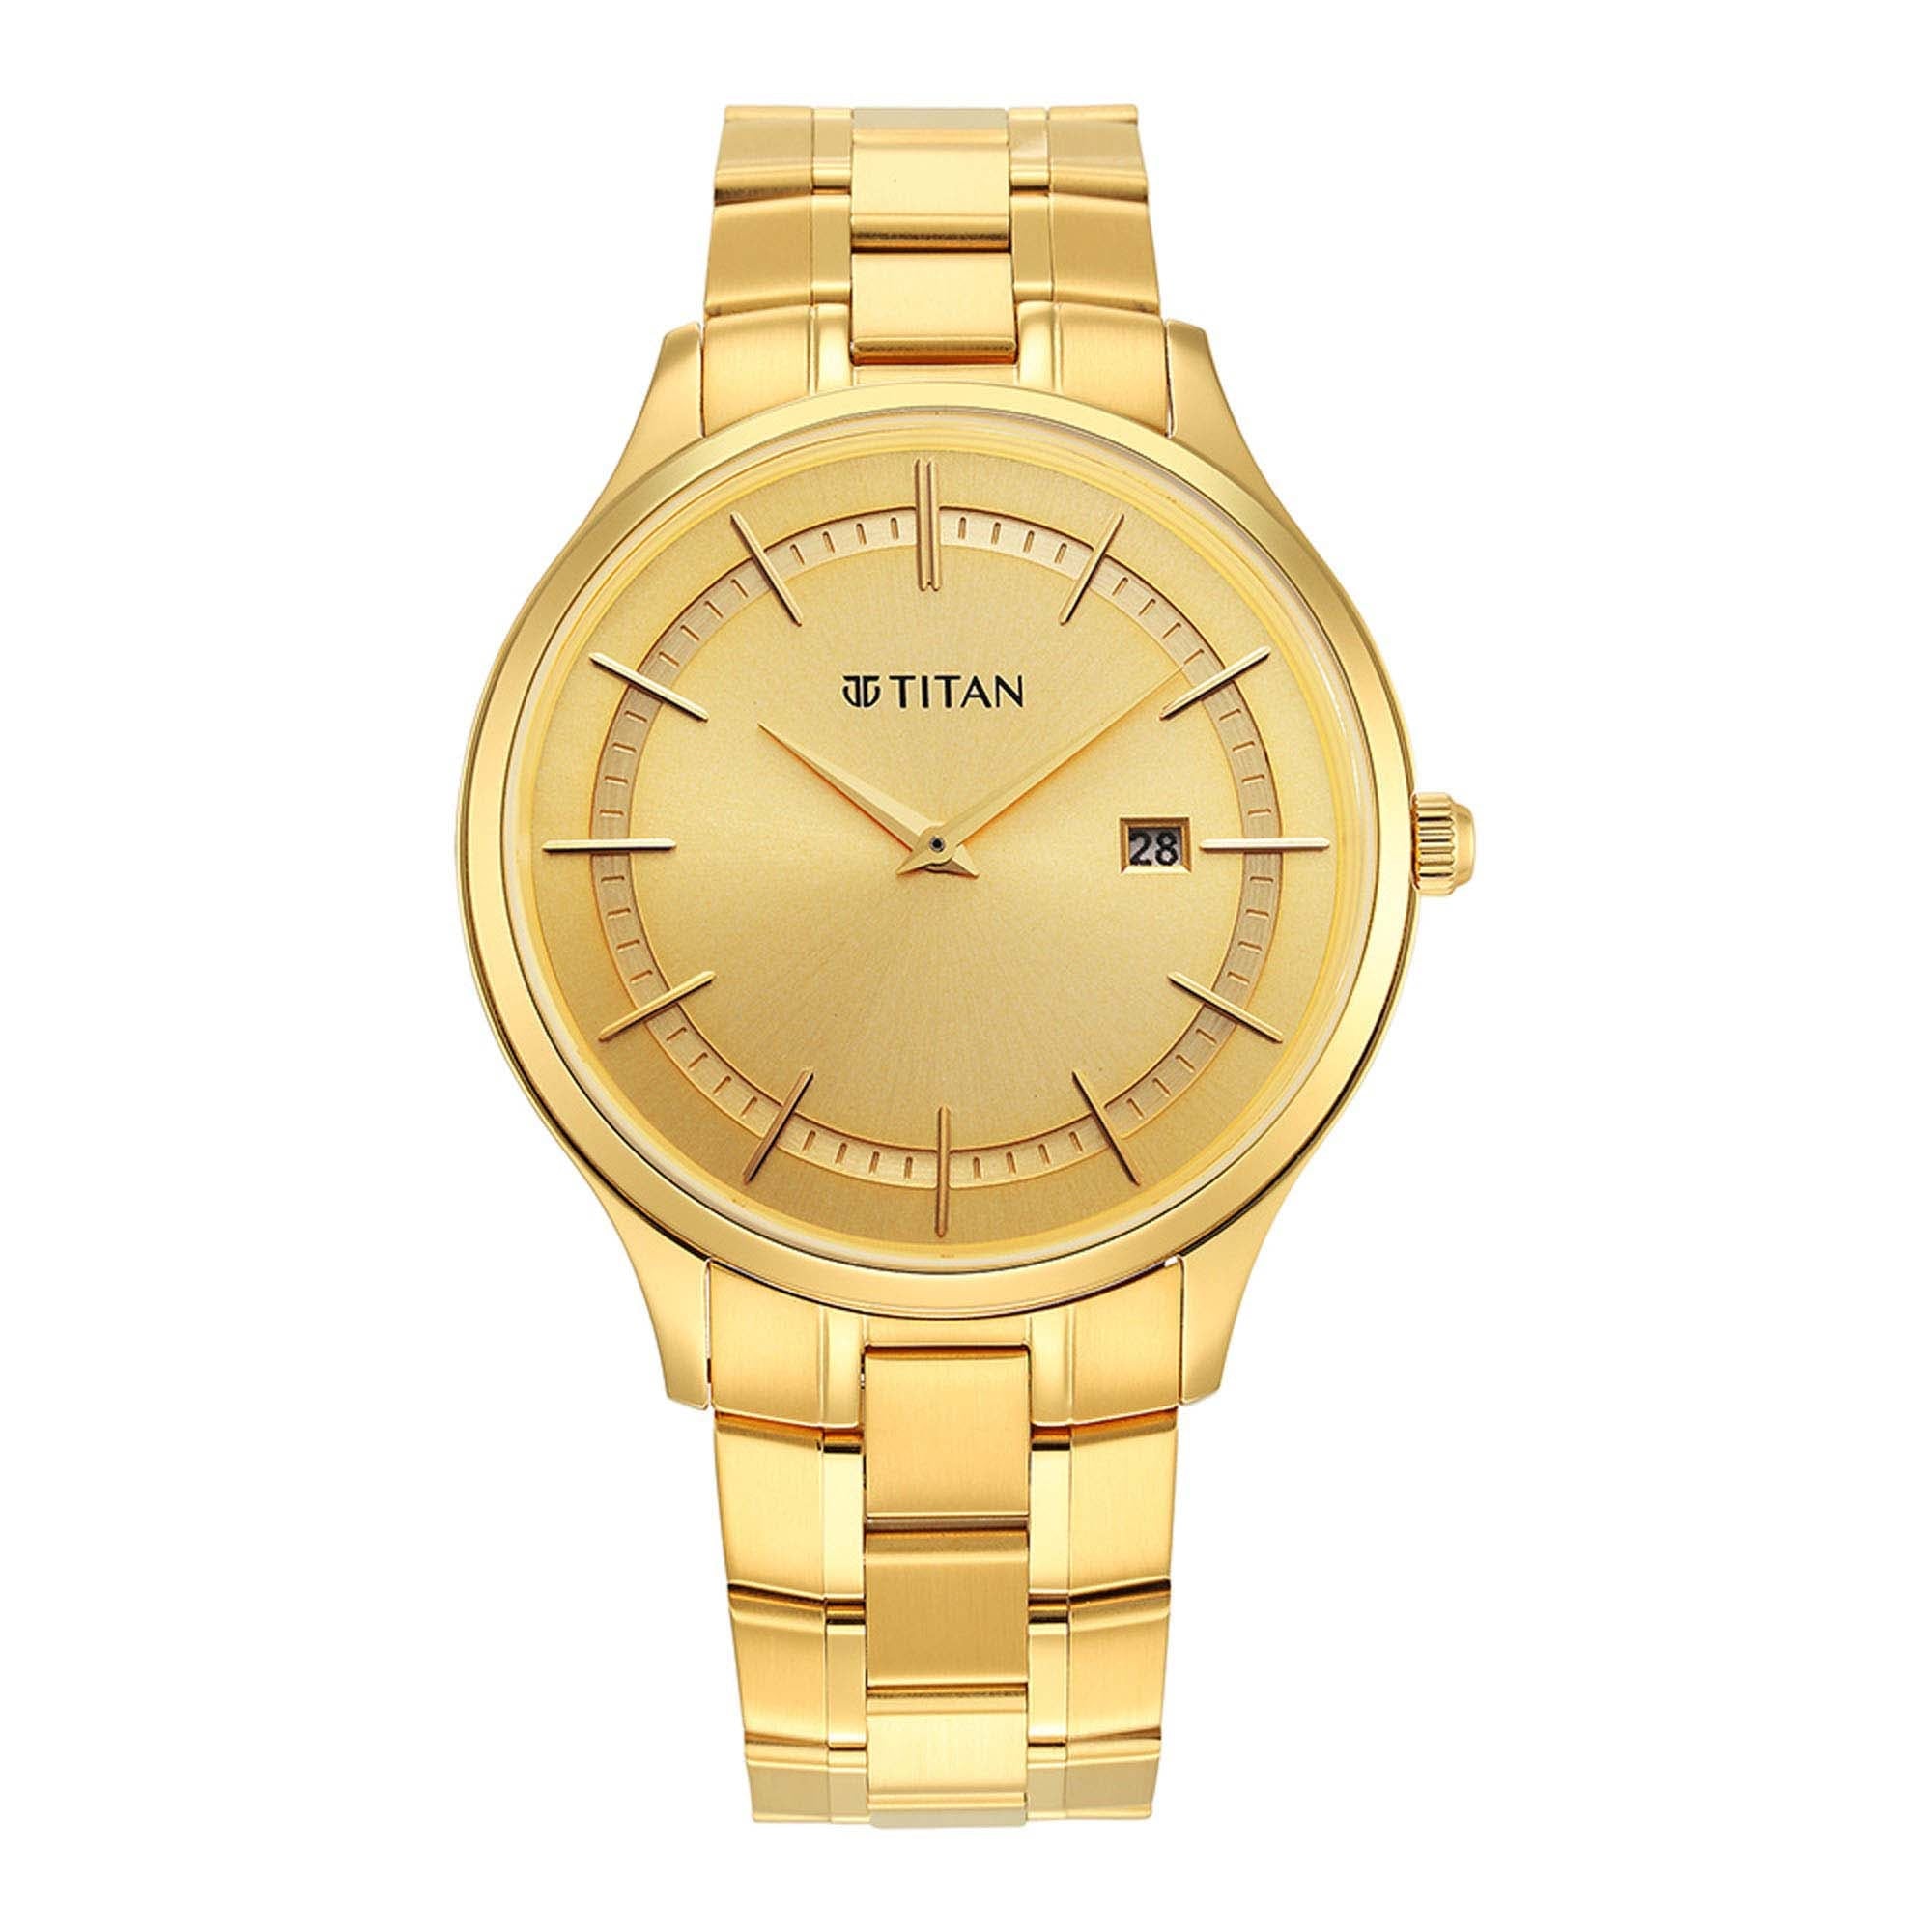 Titan Classique Slimline Champagne Dial Analog with Day and Date Stainless Steel Strap Watch for Men